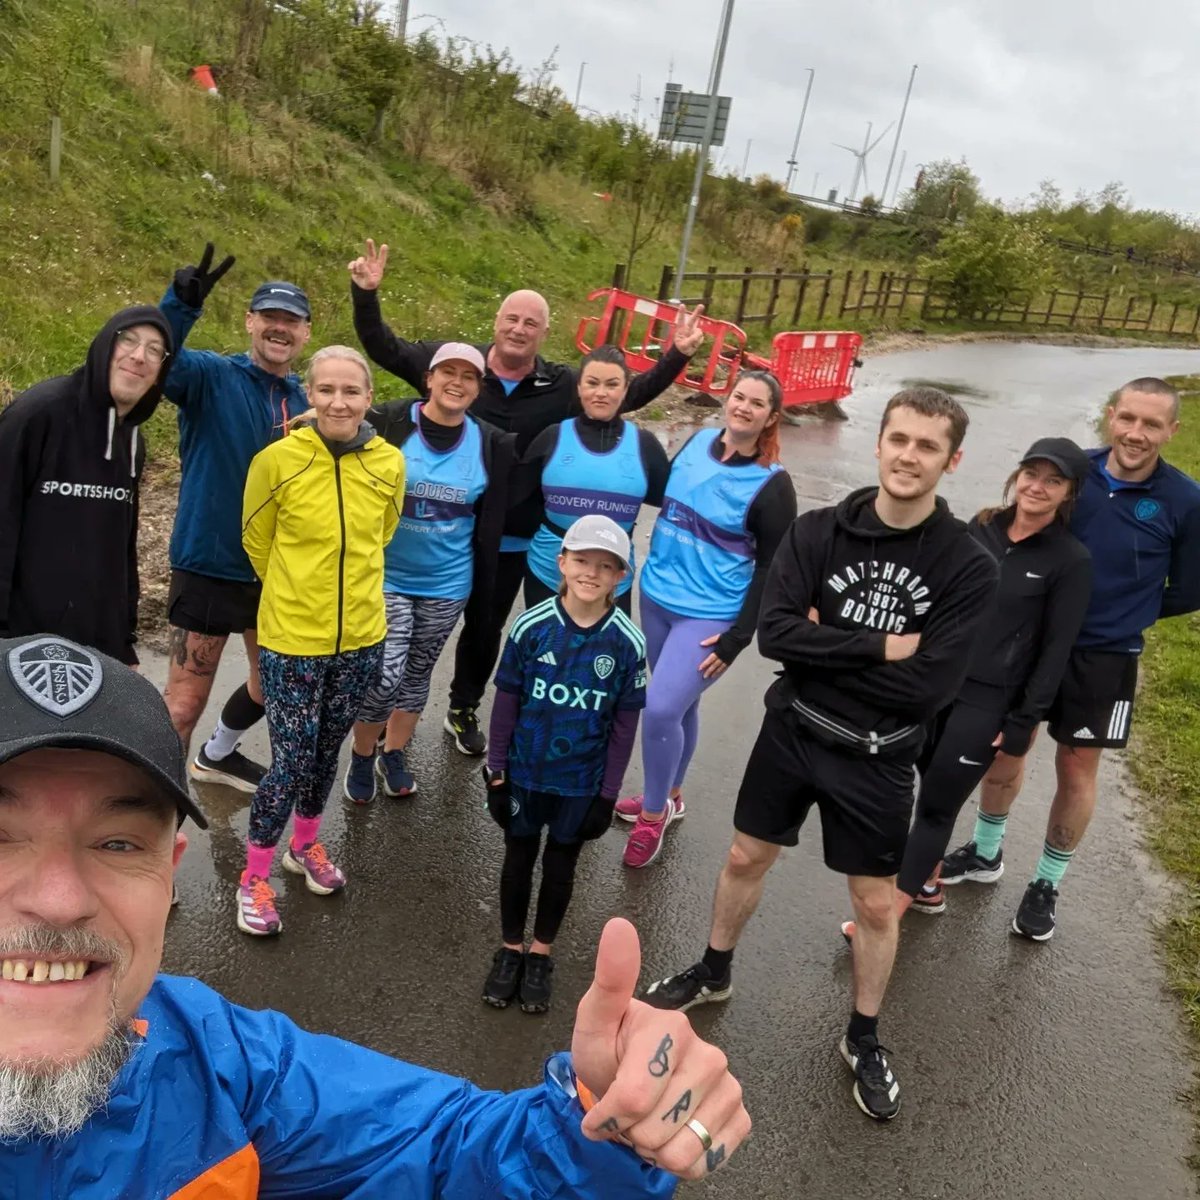 Soggy, cold and windy group 5k this morning. Well done for even getting out of bed this morning You're all amazing @alison_4life @EbanieBridges @PaulTonkinson @RunComPod @Dominicmatteo21 @JackBateson94 @BretC22 @Gaz_Kia_Davies @itsrichwilliams @forwardleeds @BARCALeeds @GetLeeds